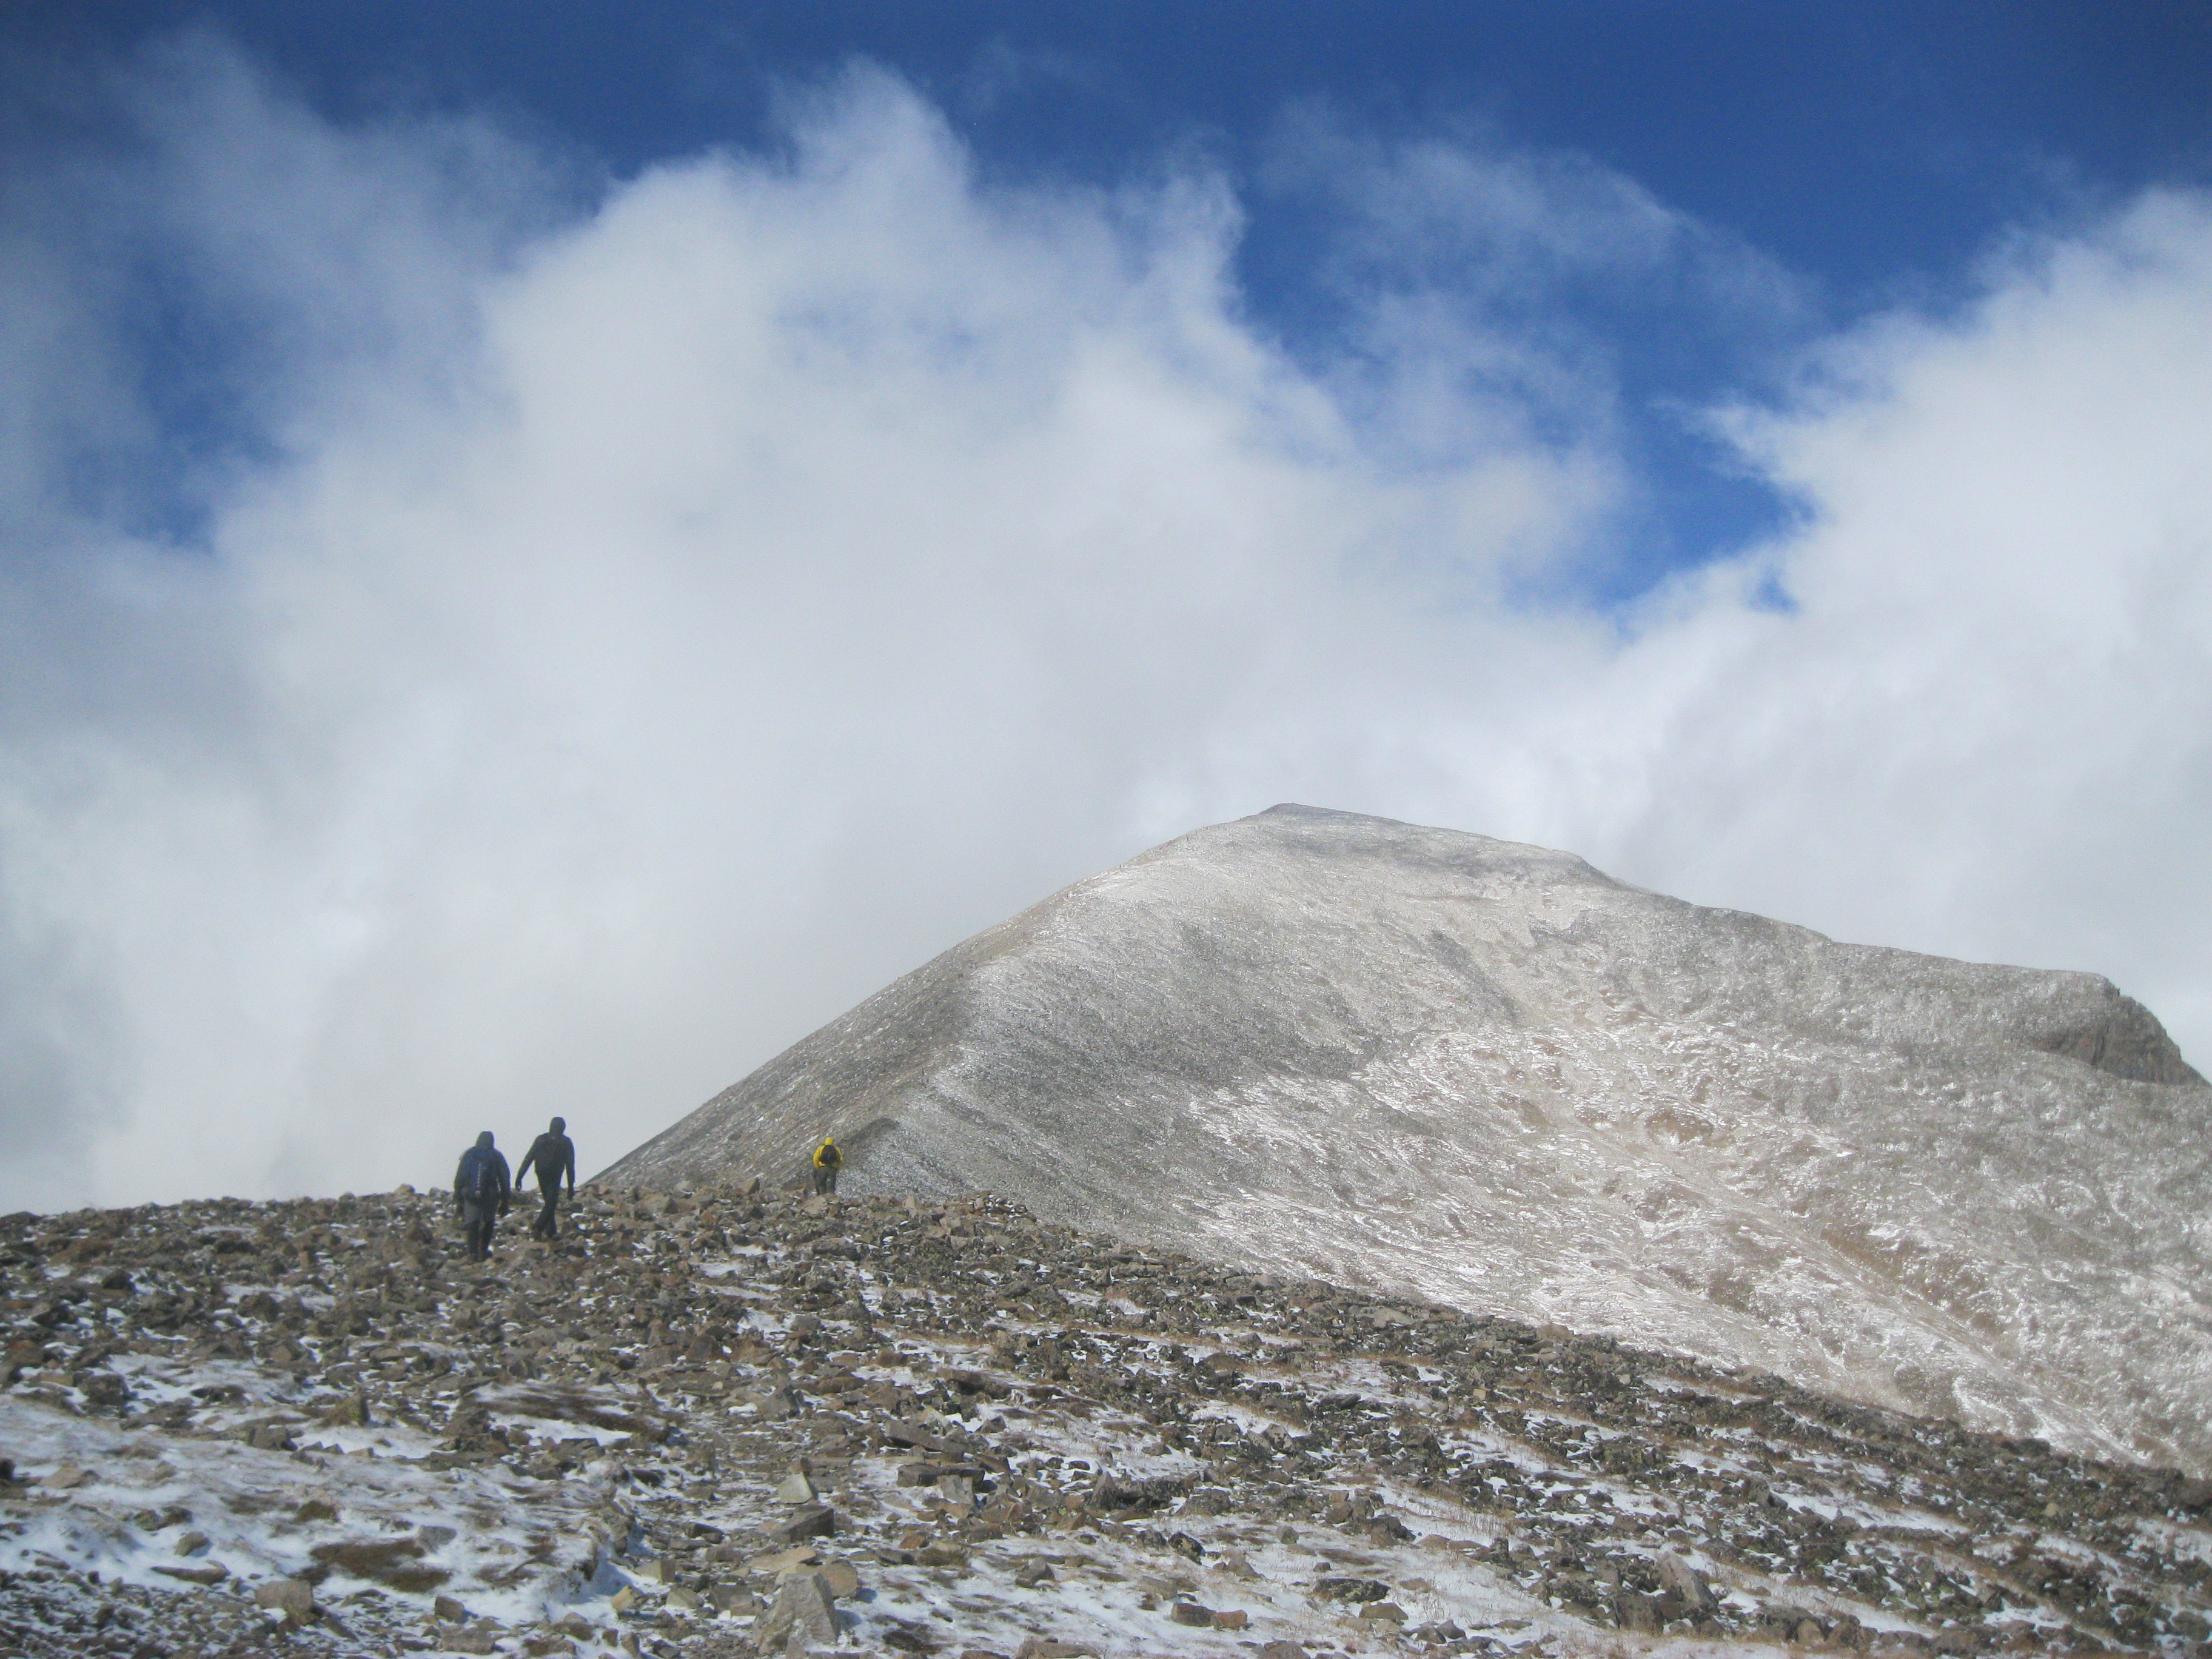 The BoulderCAST team hiking Quandary Peak this past Saturday with fresh snow